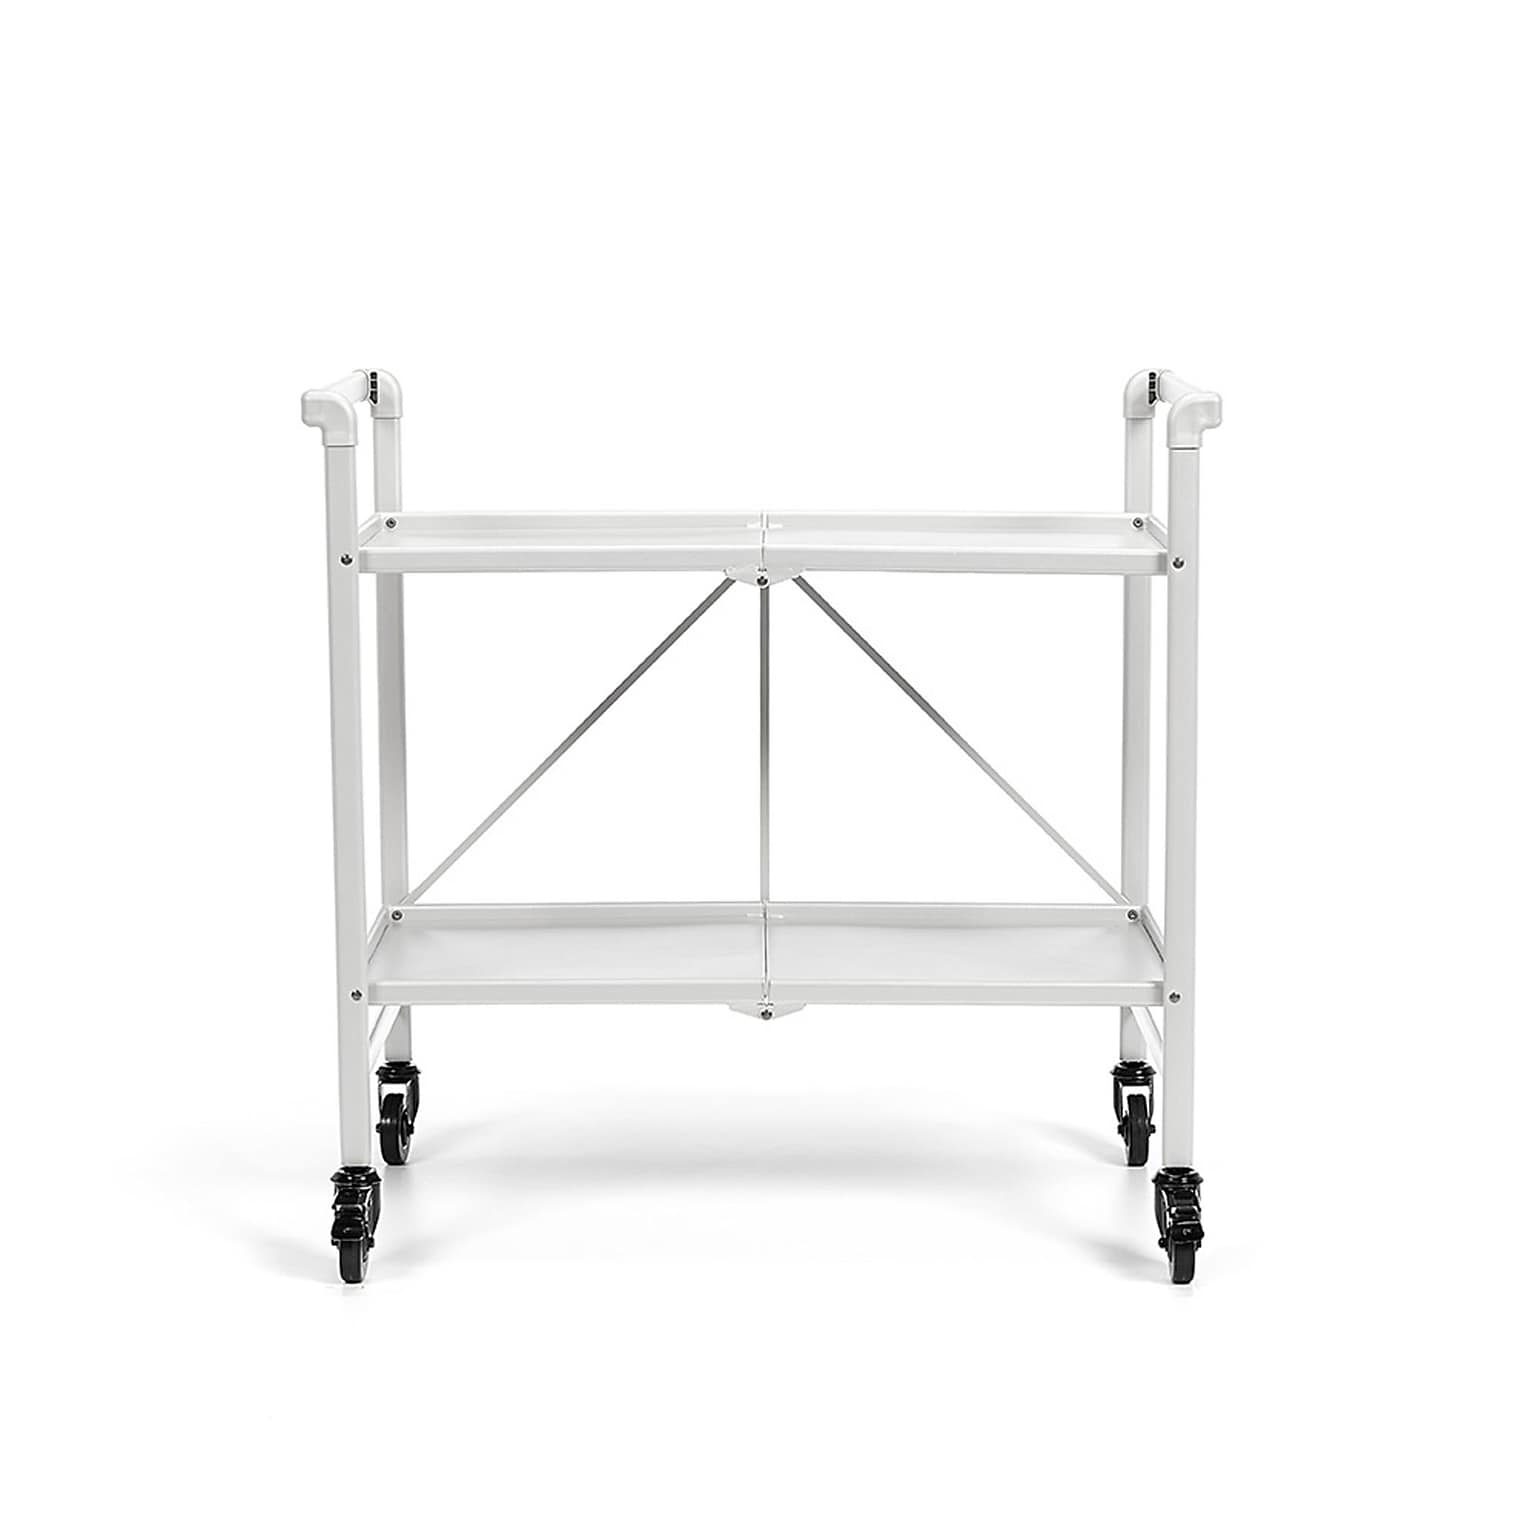 COSCO Outdoor Living INTELLIFIT Outdoor Or Indoor Folding Serving Cart with 2 Shelves, White (87602WHT1E)